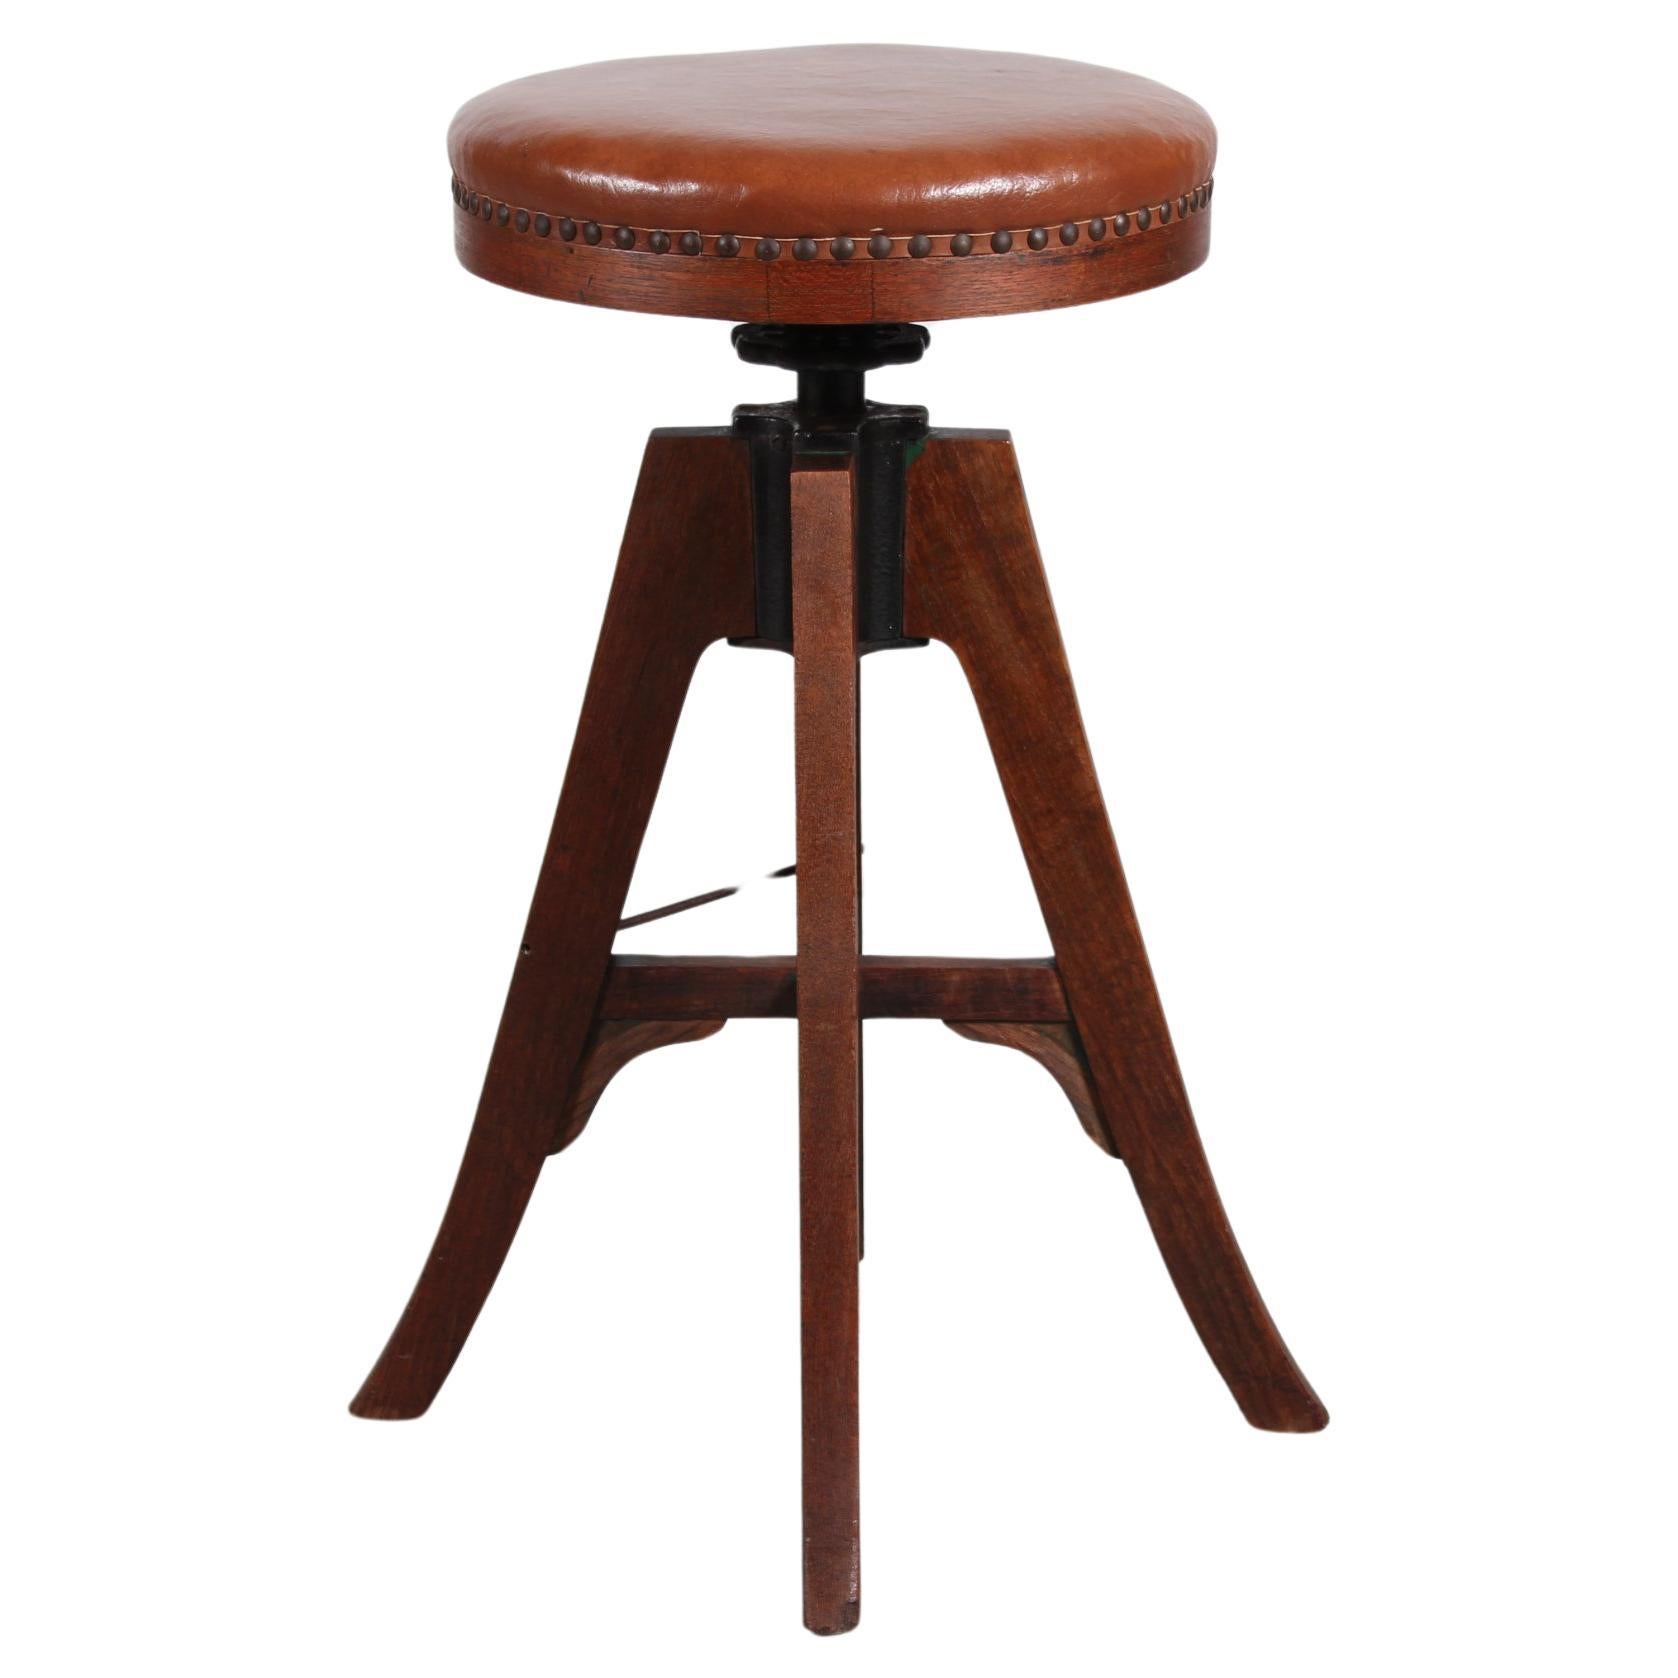 Danish Sculptural 3-Legged Wood Bar/Desk Swivel Stool with Leather Seat 1920s For Sale